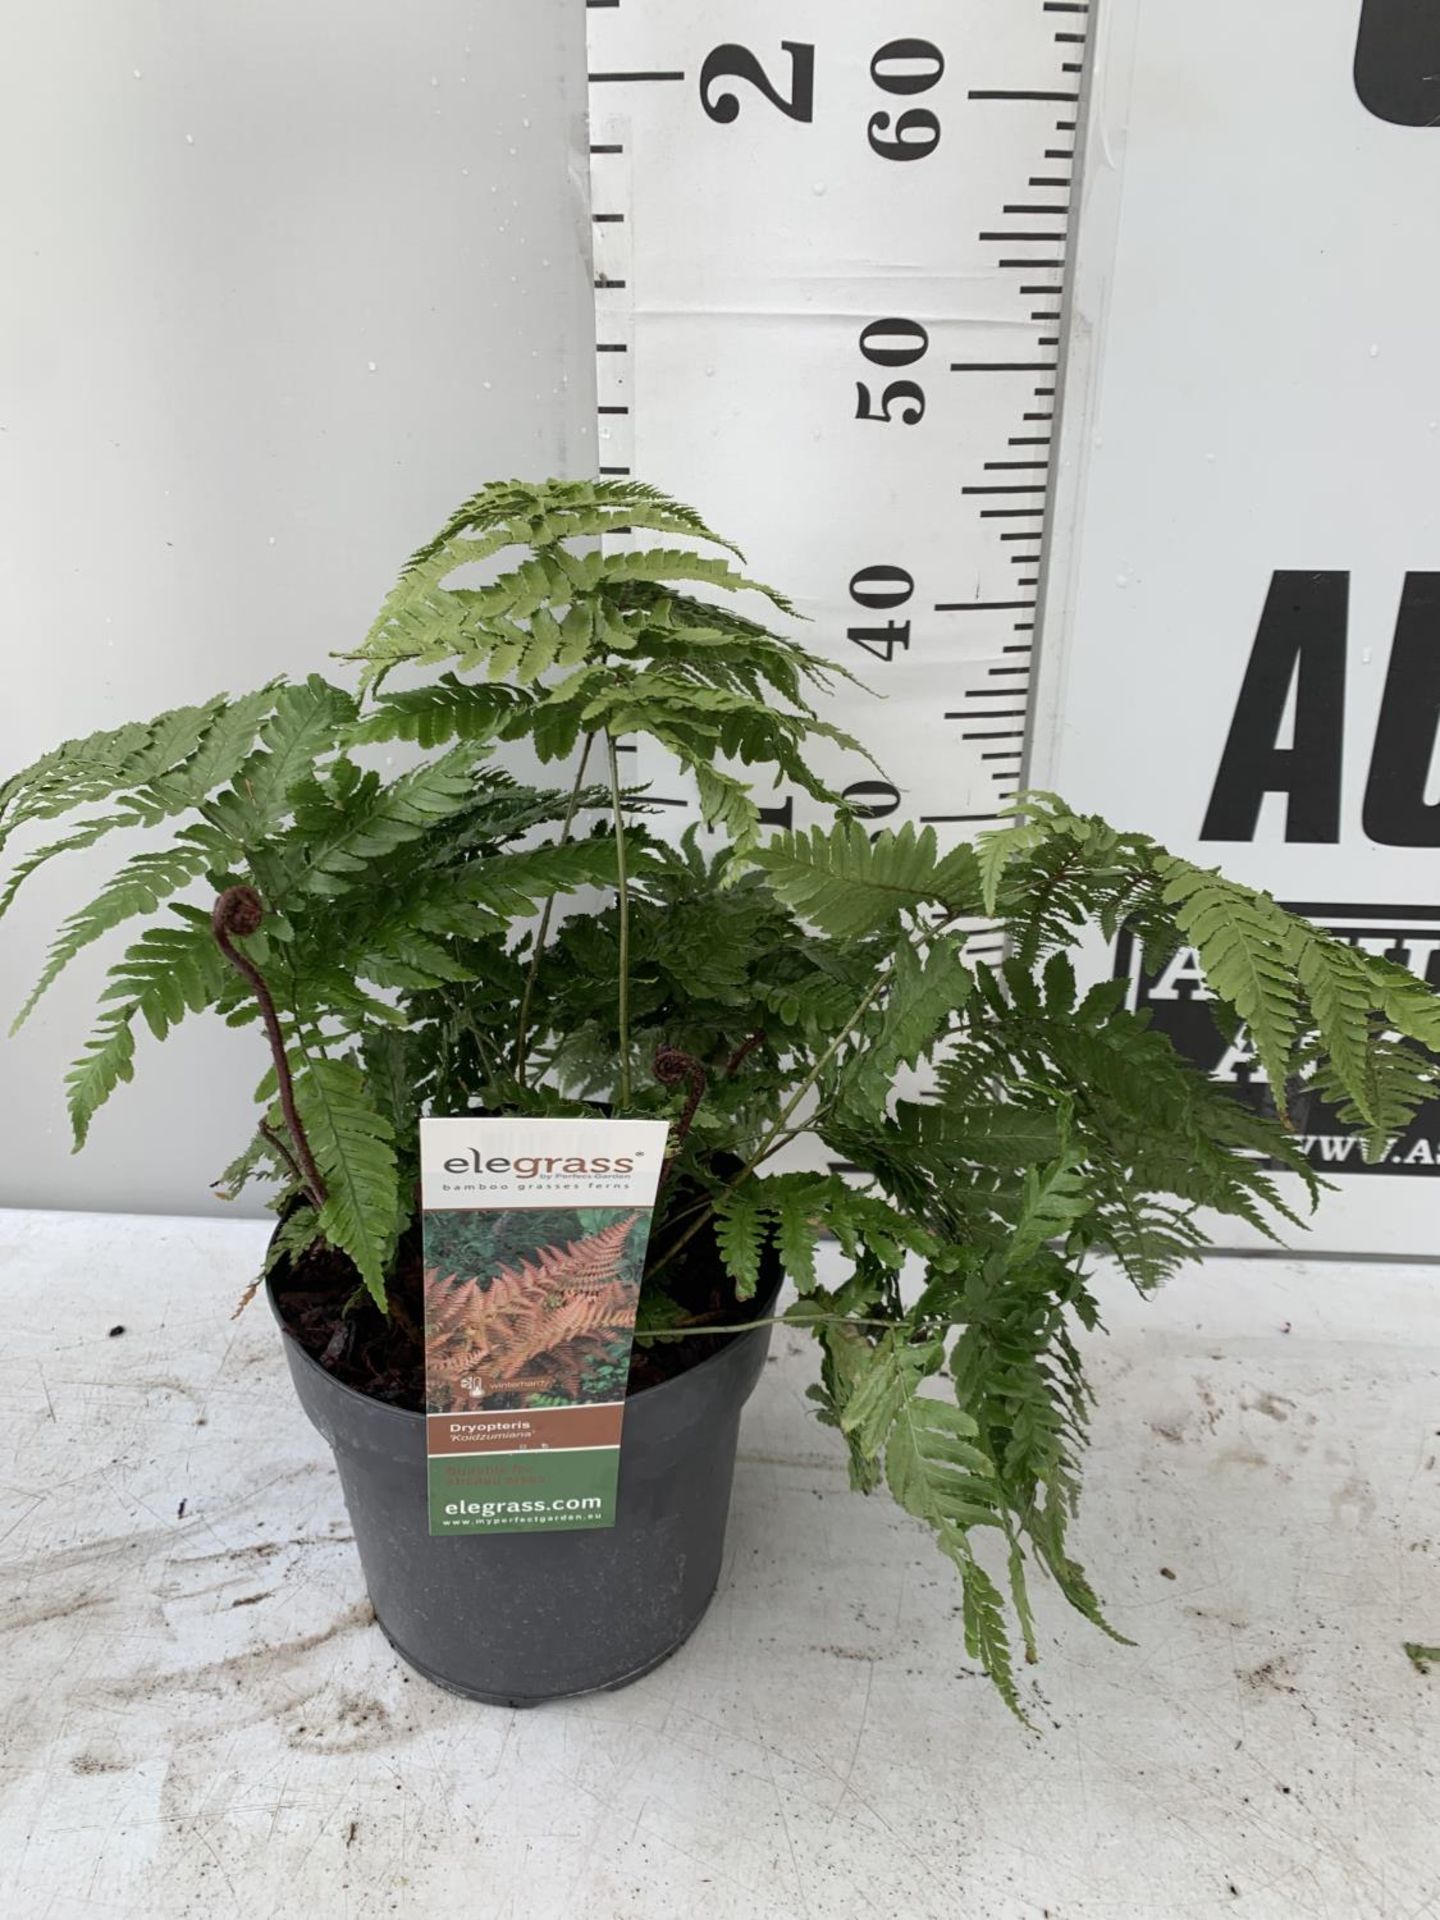 TWO LARGE ELEGRASS FERNS POLYSTICHUM AND DRYOPTERIS IN 3 LTR POTS 30-40CM TALL TO BE SOLD FOR THE - Image 6 of 9